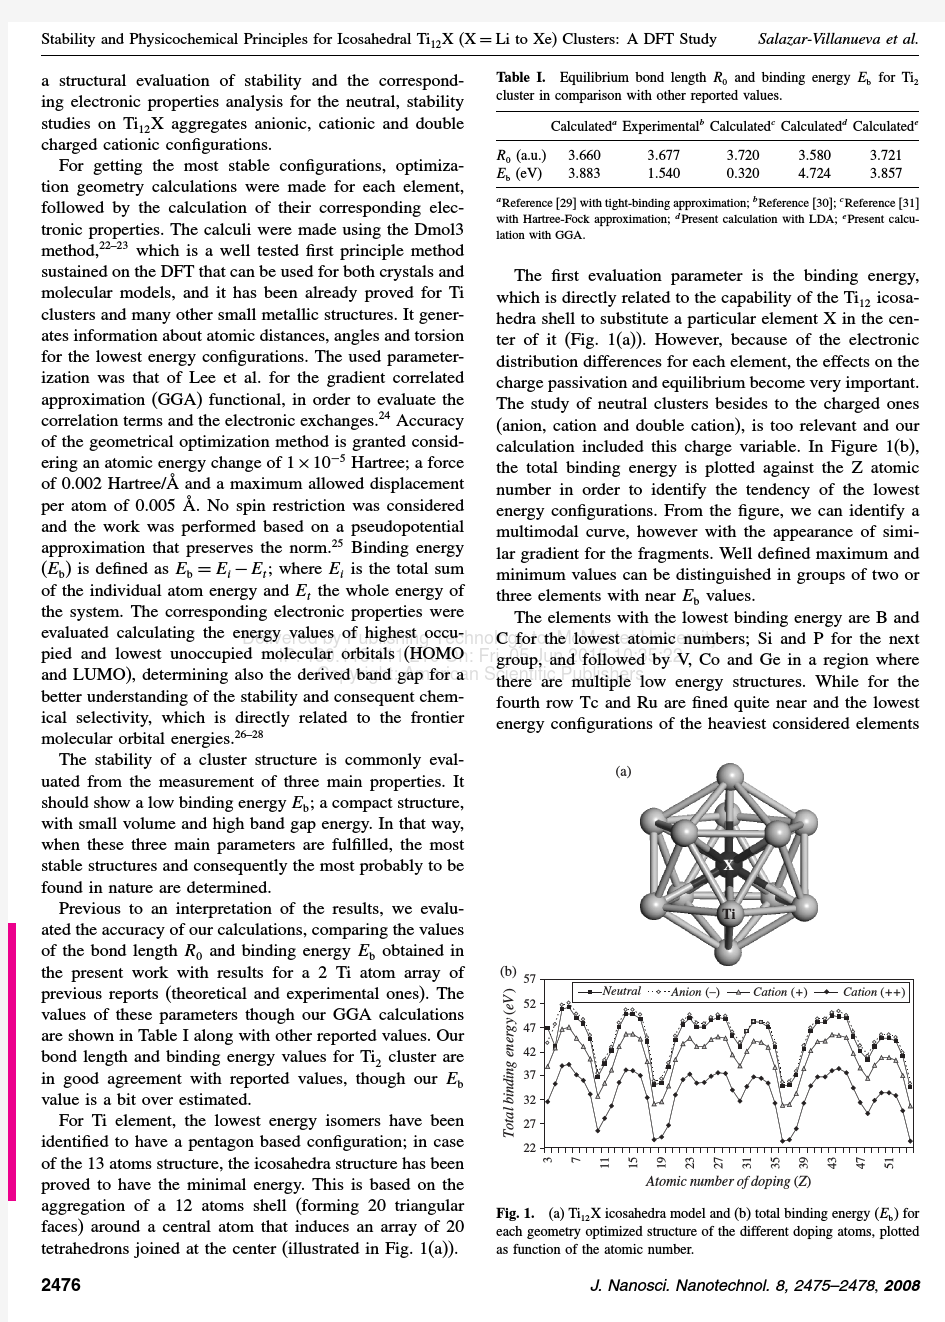 Stability and Physicochemical Principles for Icosahedral Ti12X X = Li to Xe Clusters A DFT Study